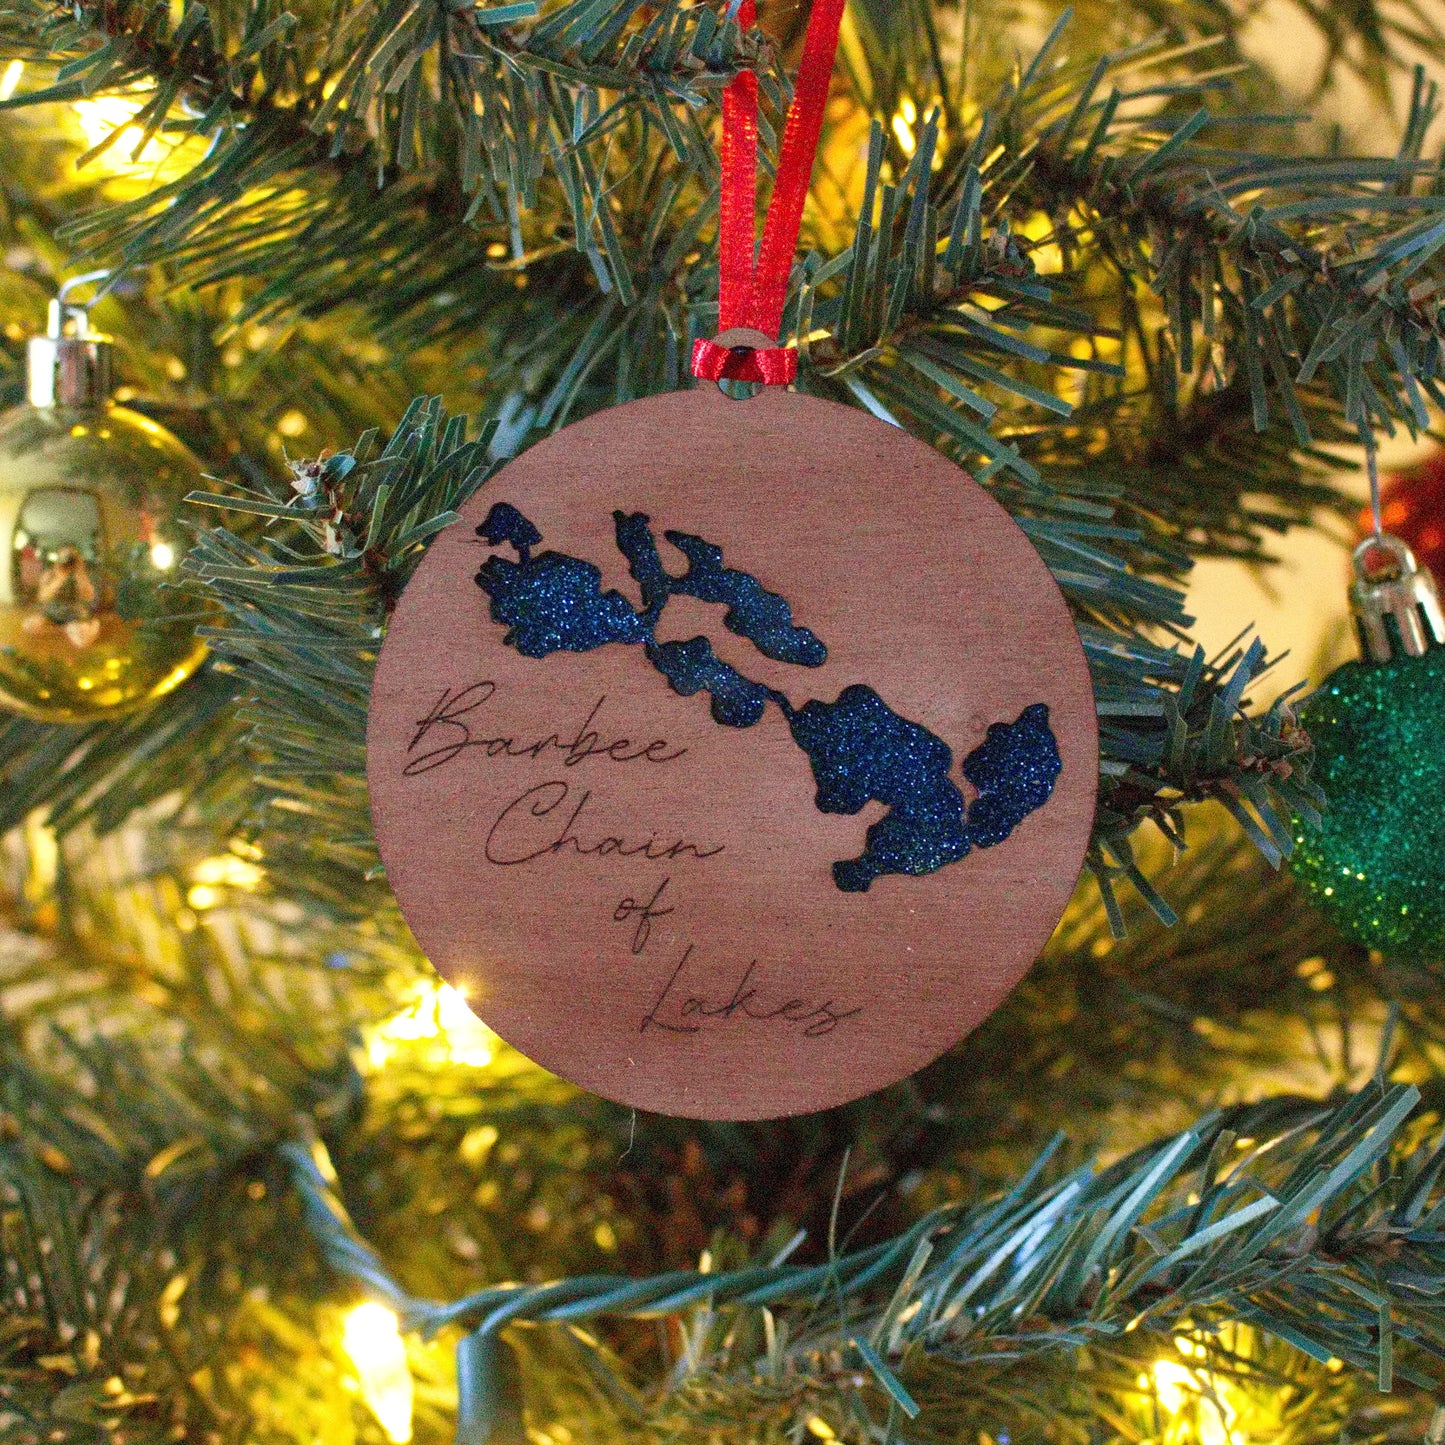 Barbee Chain of Lakes Acrylic and Wood Christmas Ornament.  Great for a personalized and custom gift for grandparents, parents, or children.    